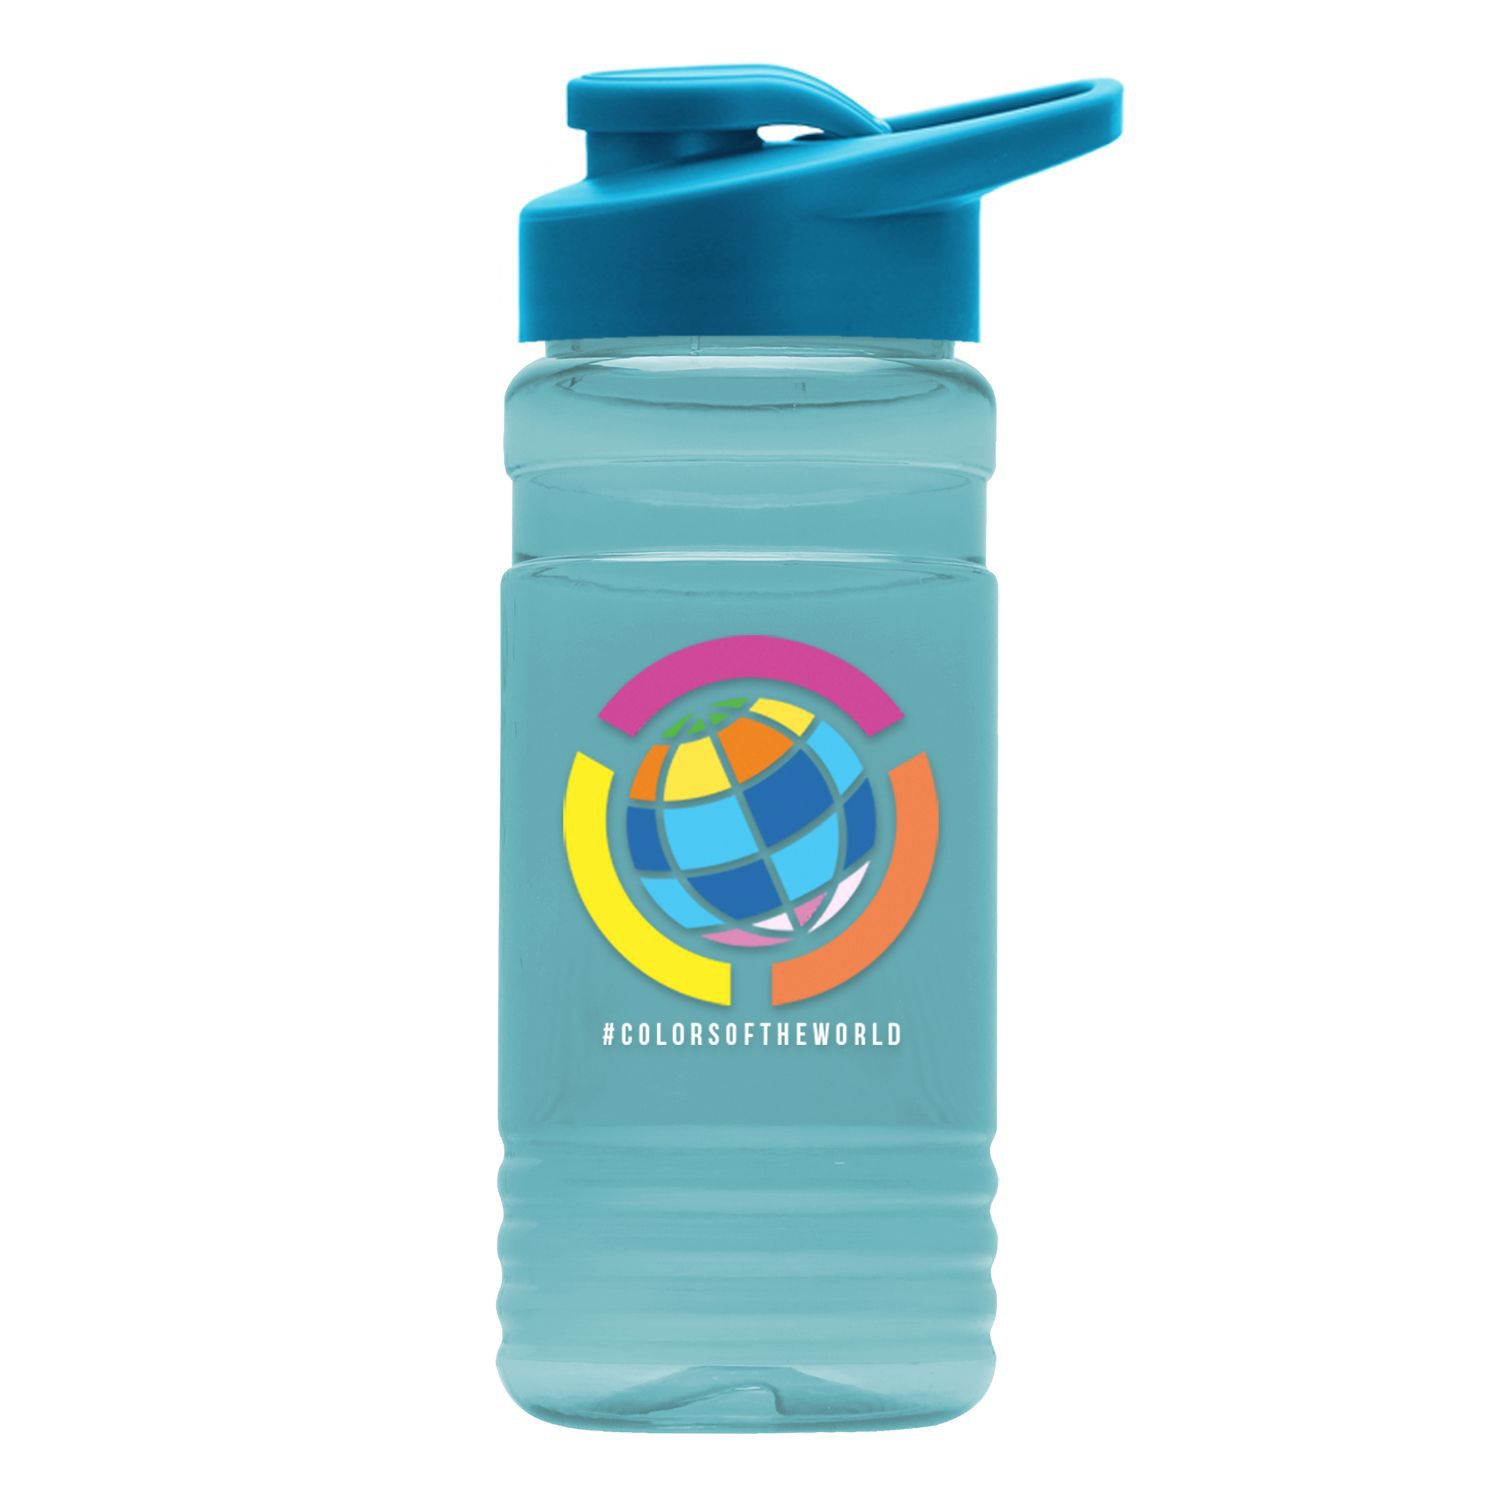 20 oz. Recycled PETE Bottle With Drink-Thru Lid Full Color